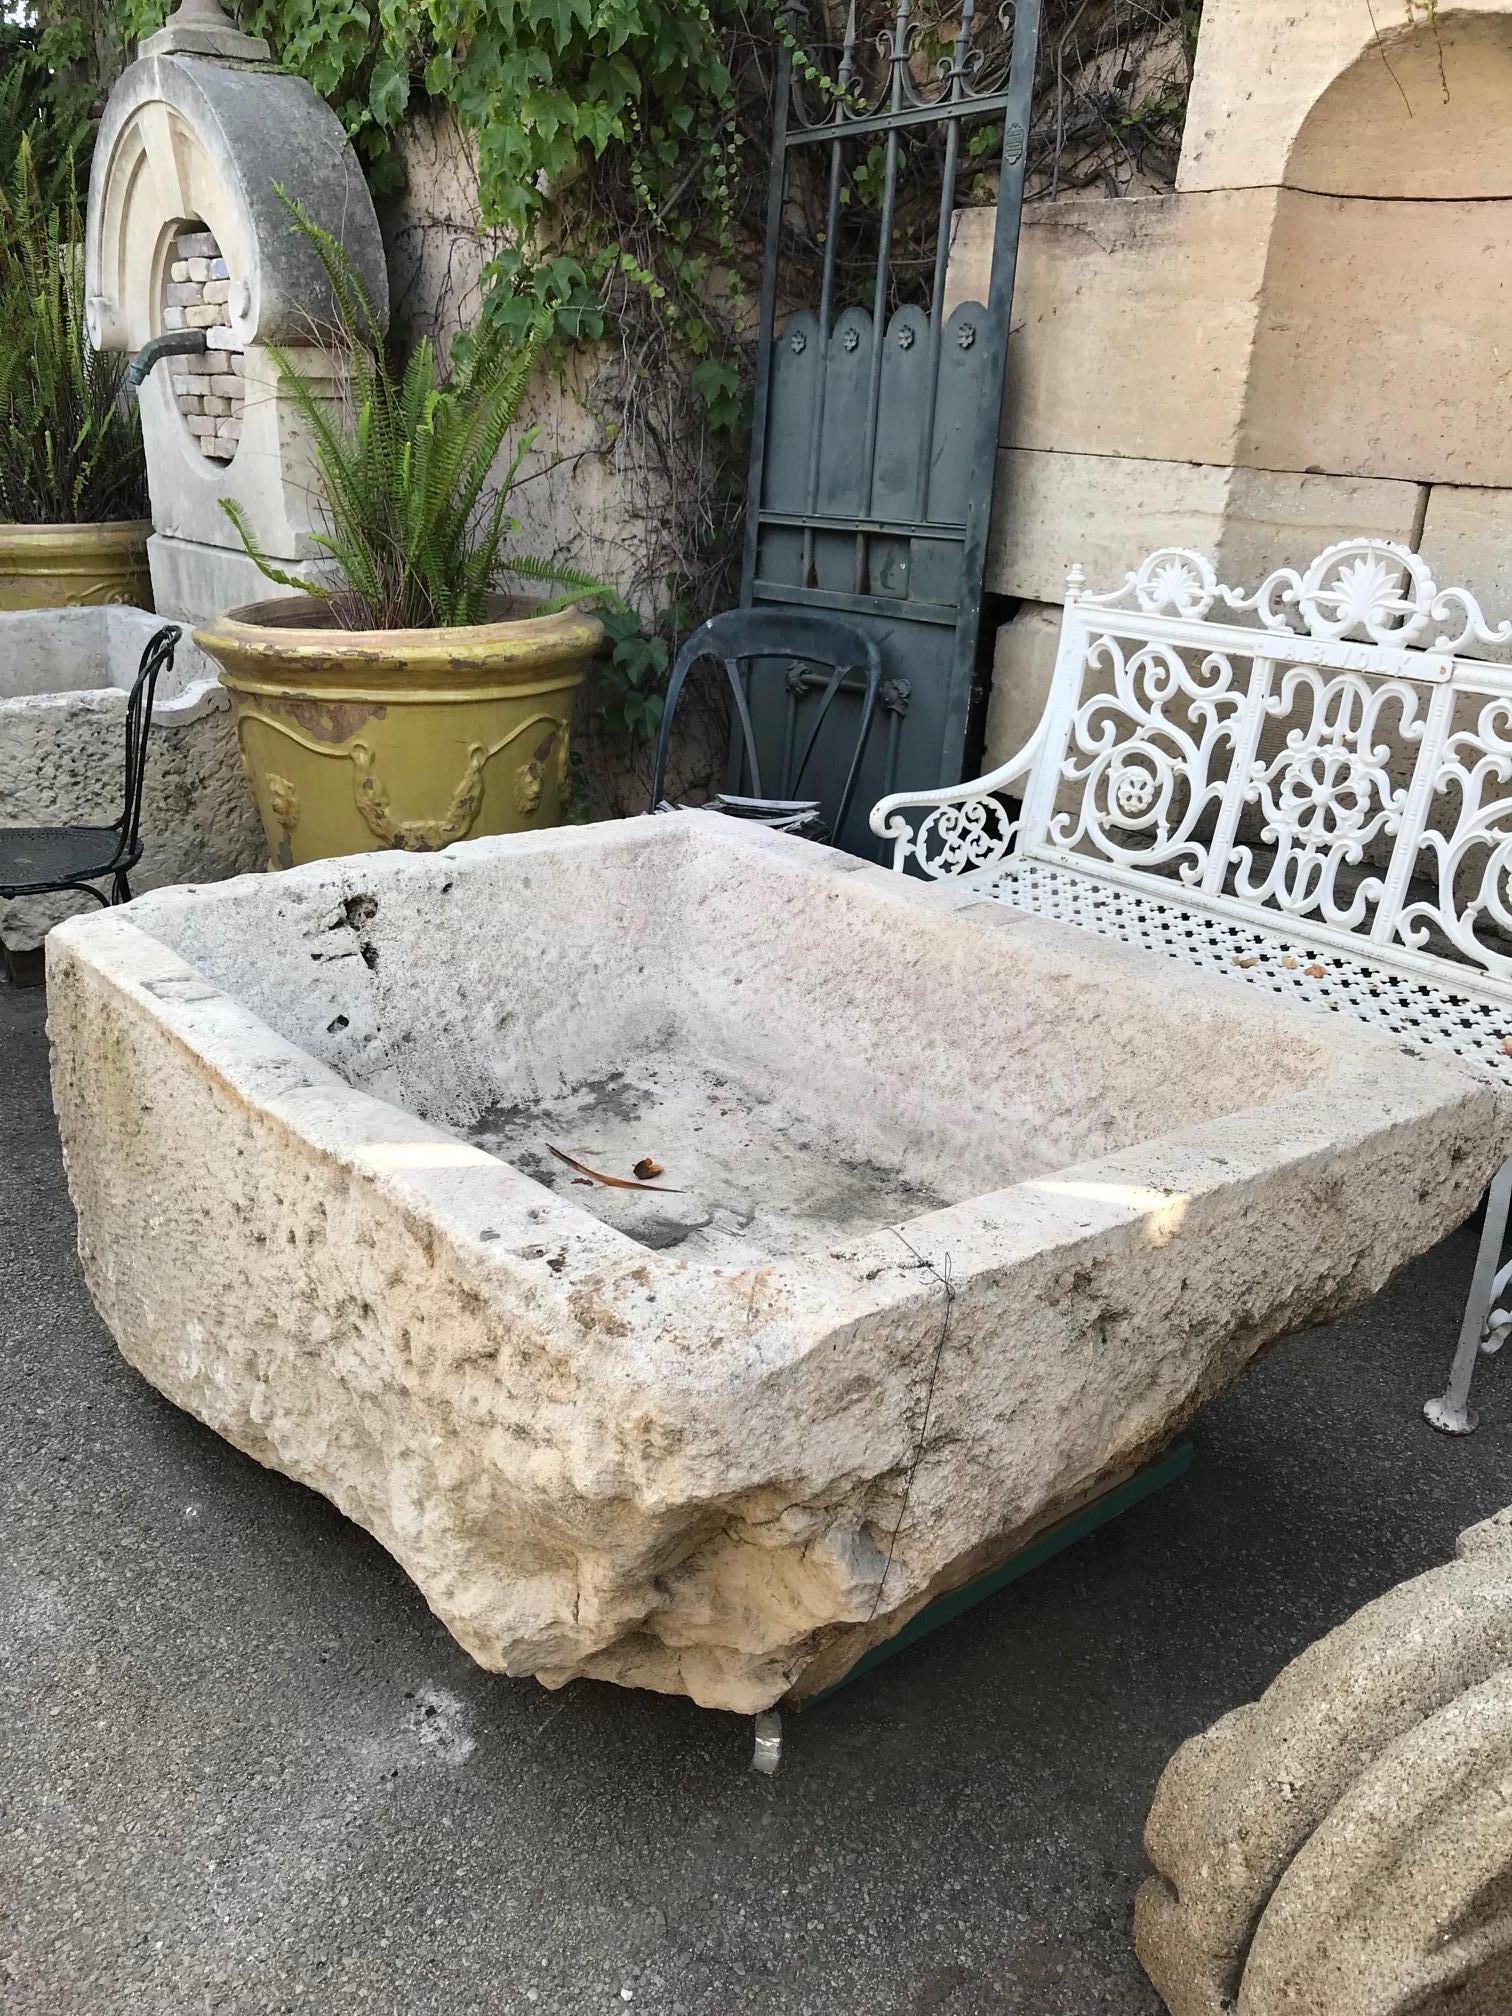 A beautiful uneven 18th century water fountain basin of hand carved stone. It could be installed with a simple bronze spout or a carved stone fountain head, we have many options of them, in order to create a charming garden water fountain. This good